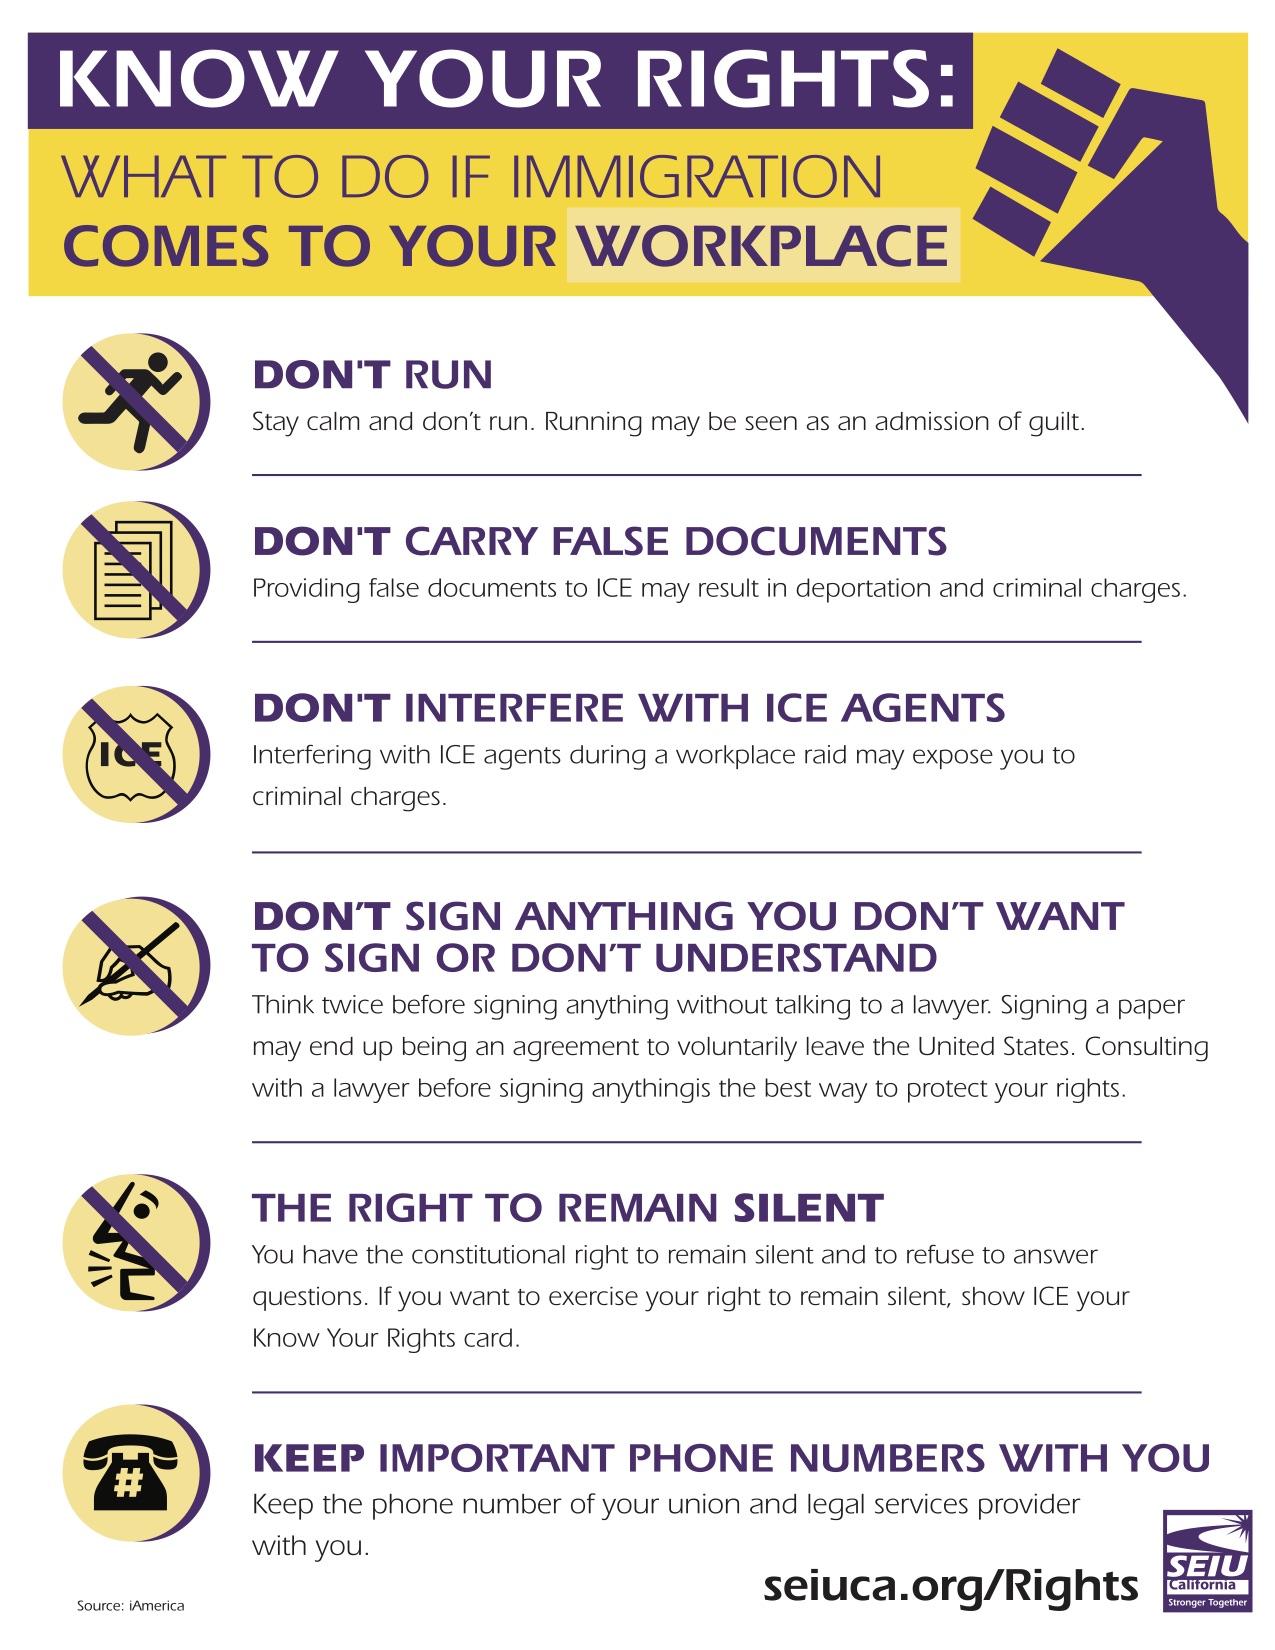 WHAT TO DO IF IMMIGRATION COMES TO YOUR WORKPLACE